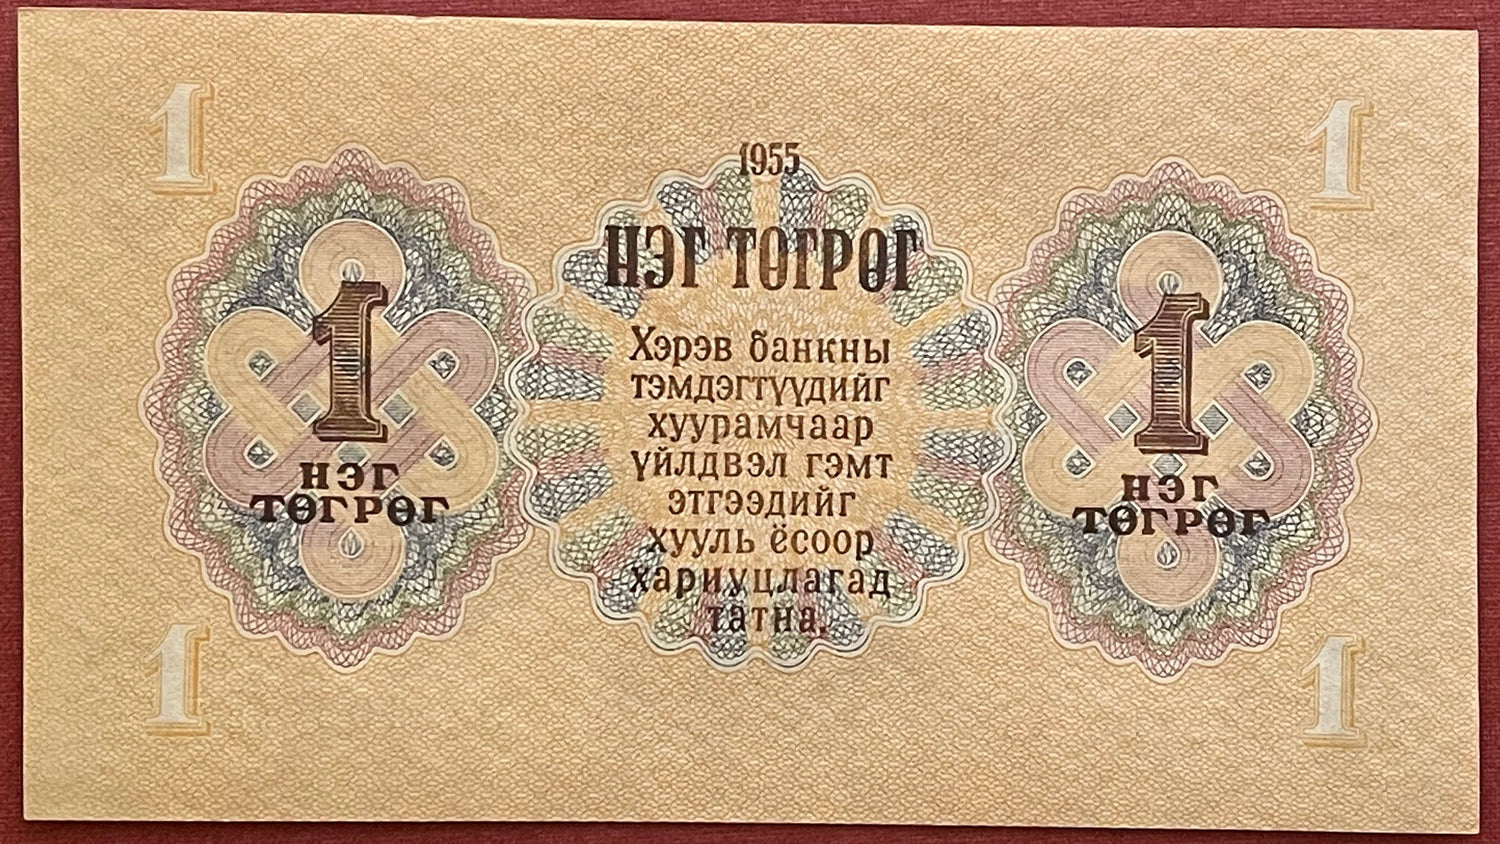 Wind Horse, Revolutionary Damdin Sükhbaatar & Buddhist Endless Knot 1 Tögrög Mongolia Authentic Banknote Money for Collage (Lucky) 1955